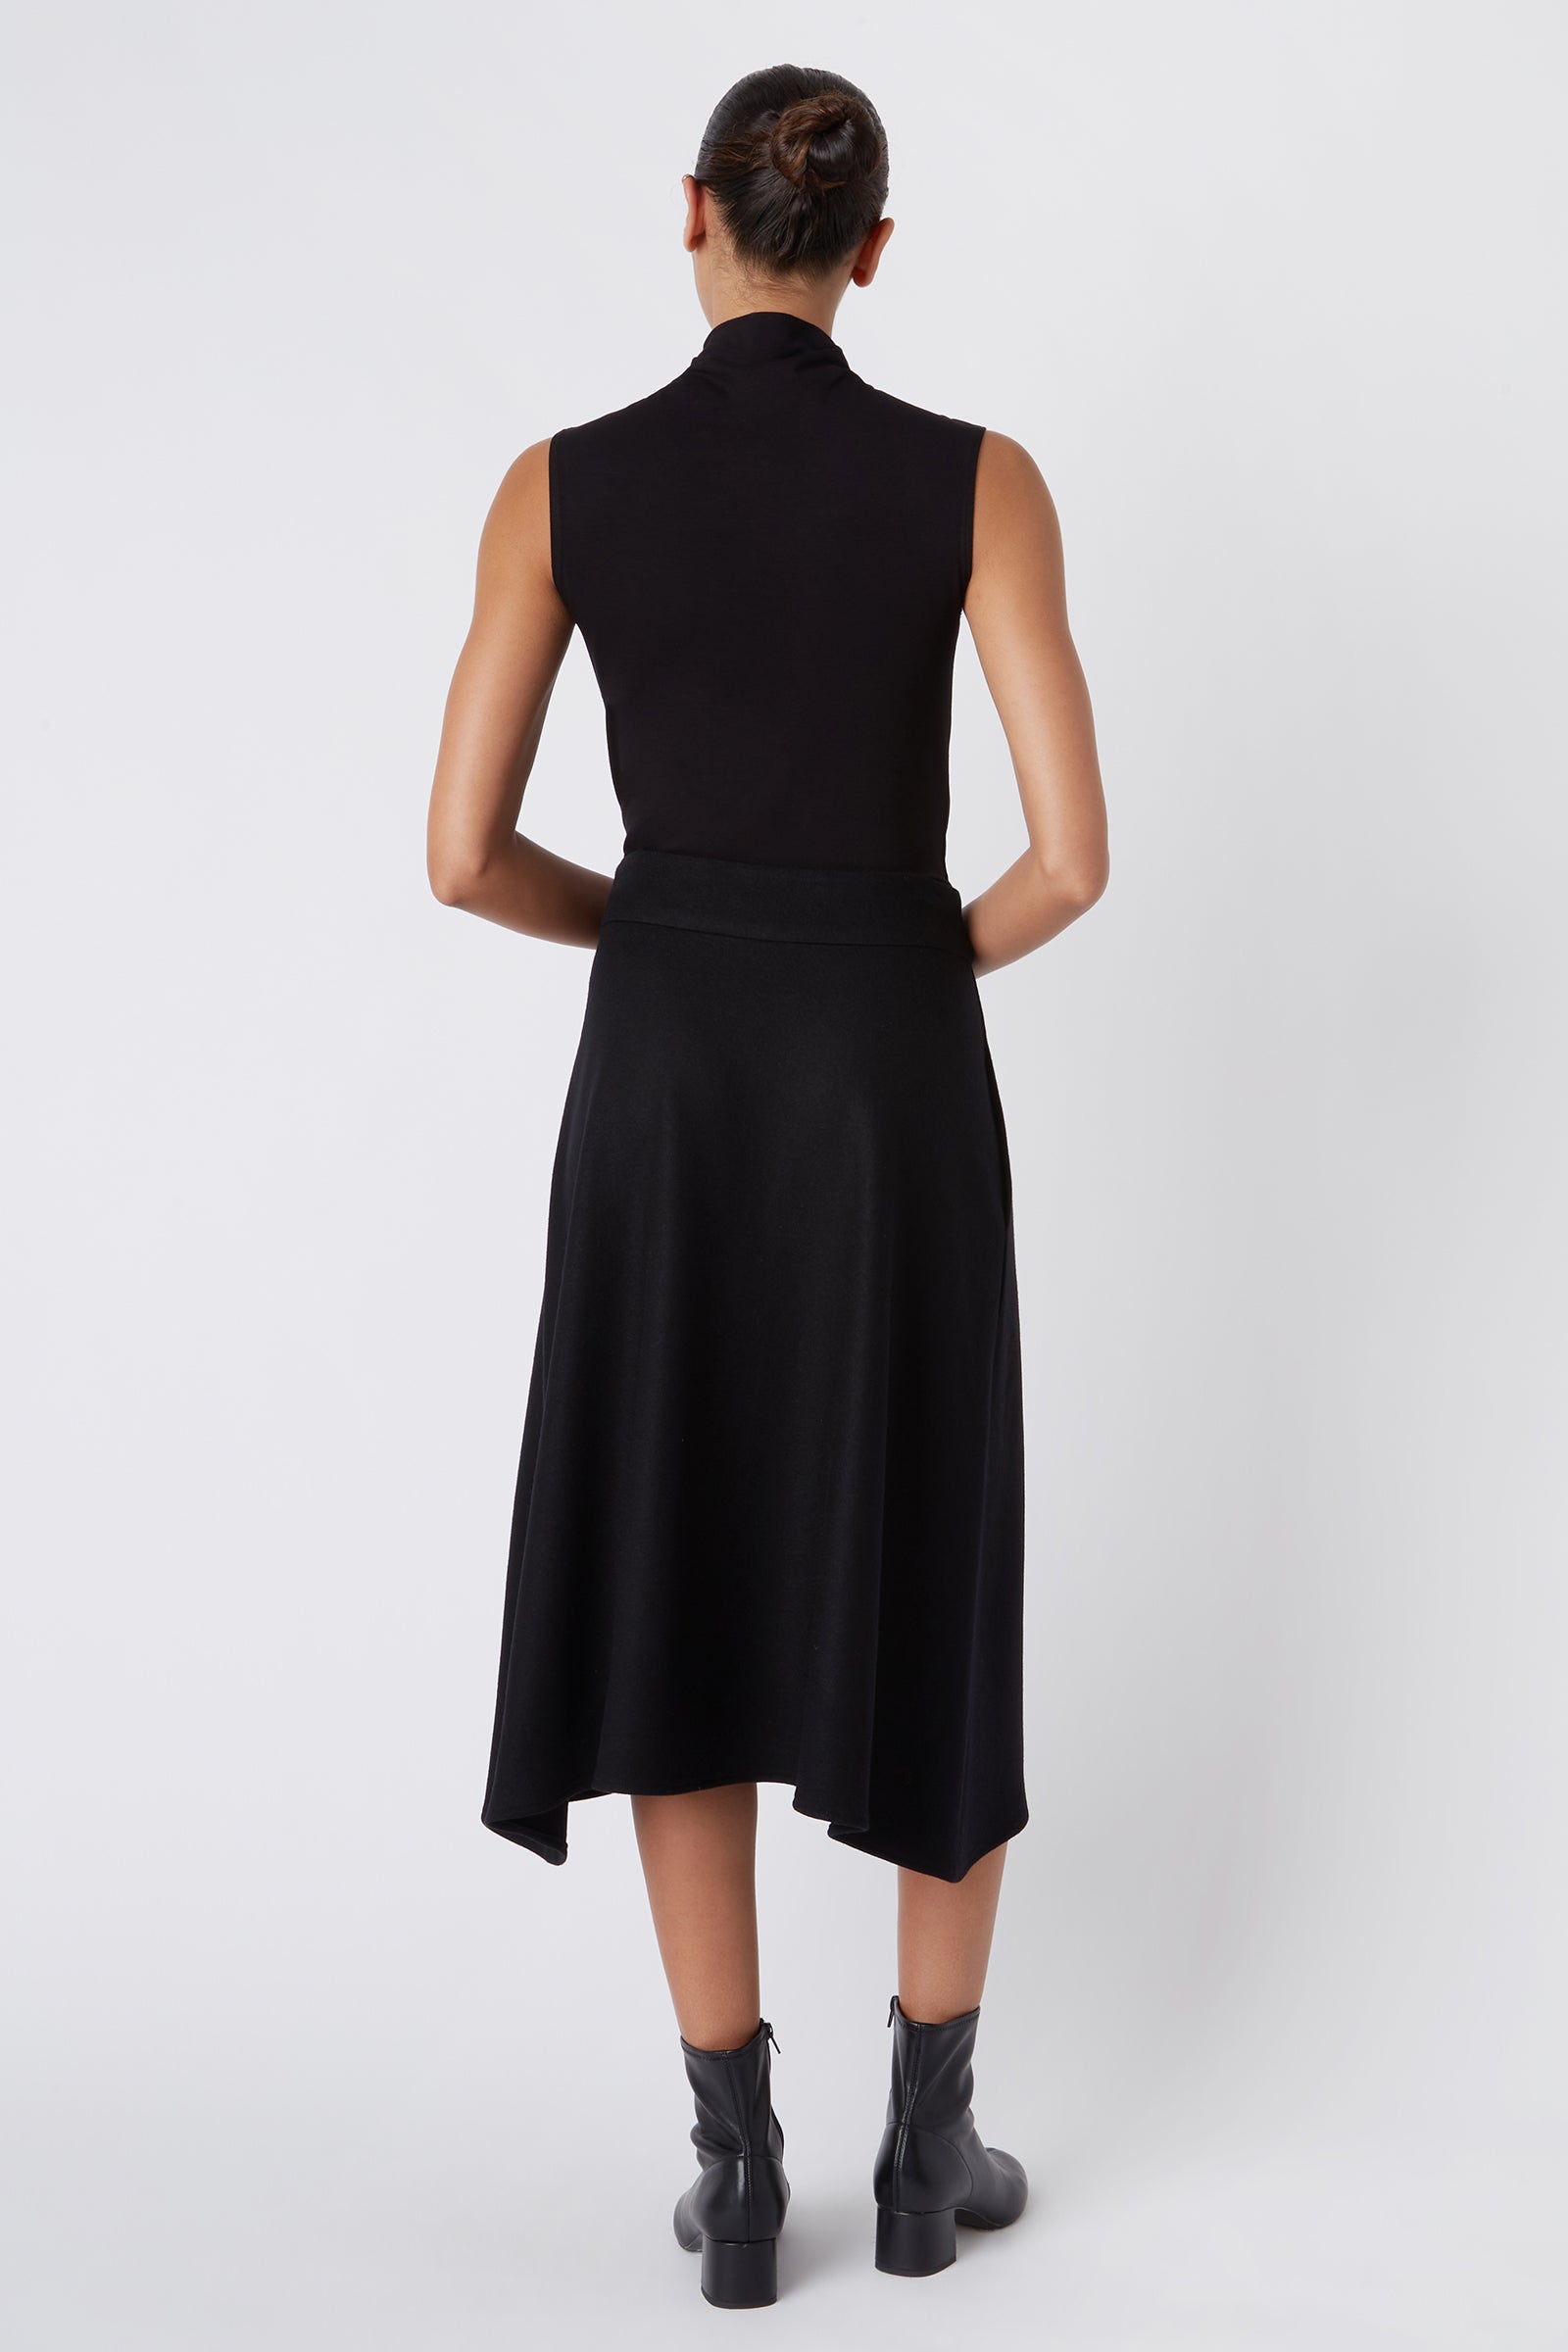 Kal Rieman Martina Kick Skirt in Black Felted Jersey on Model Main Full Front View